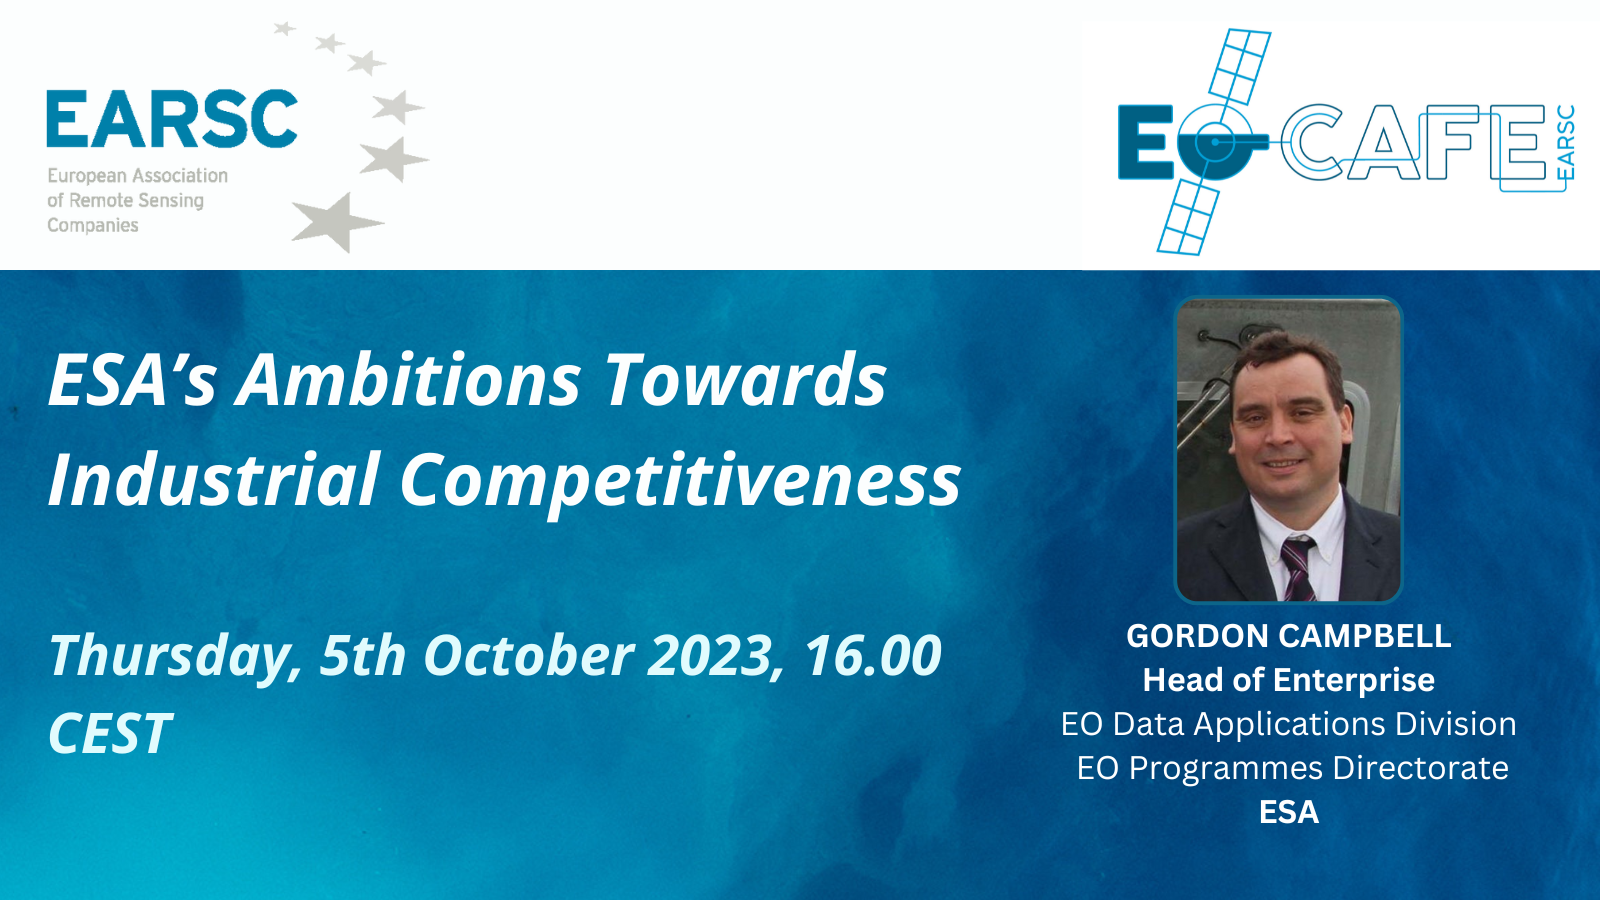 EOcafe: ESA’s Ambitions Towards Industrial Competitiveness